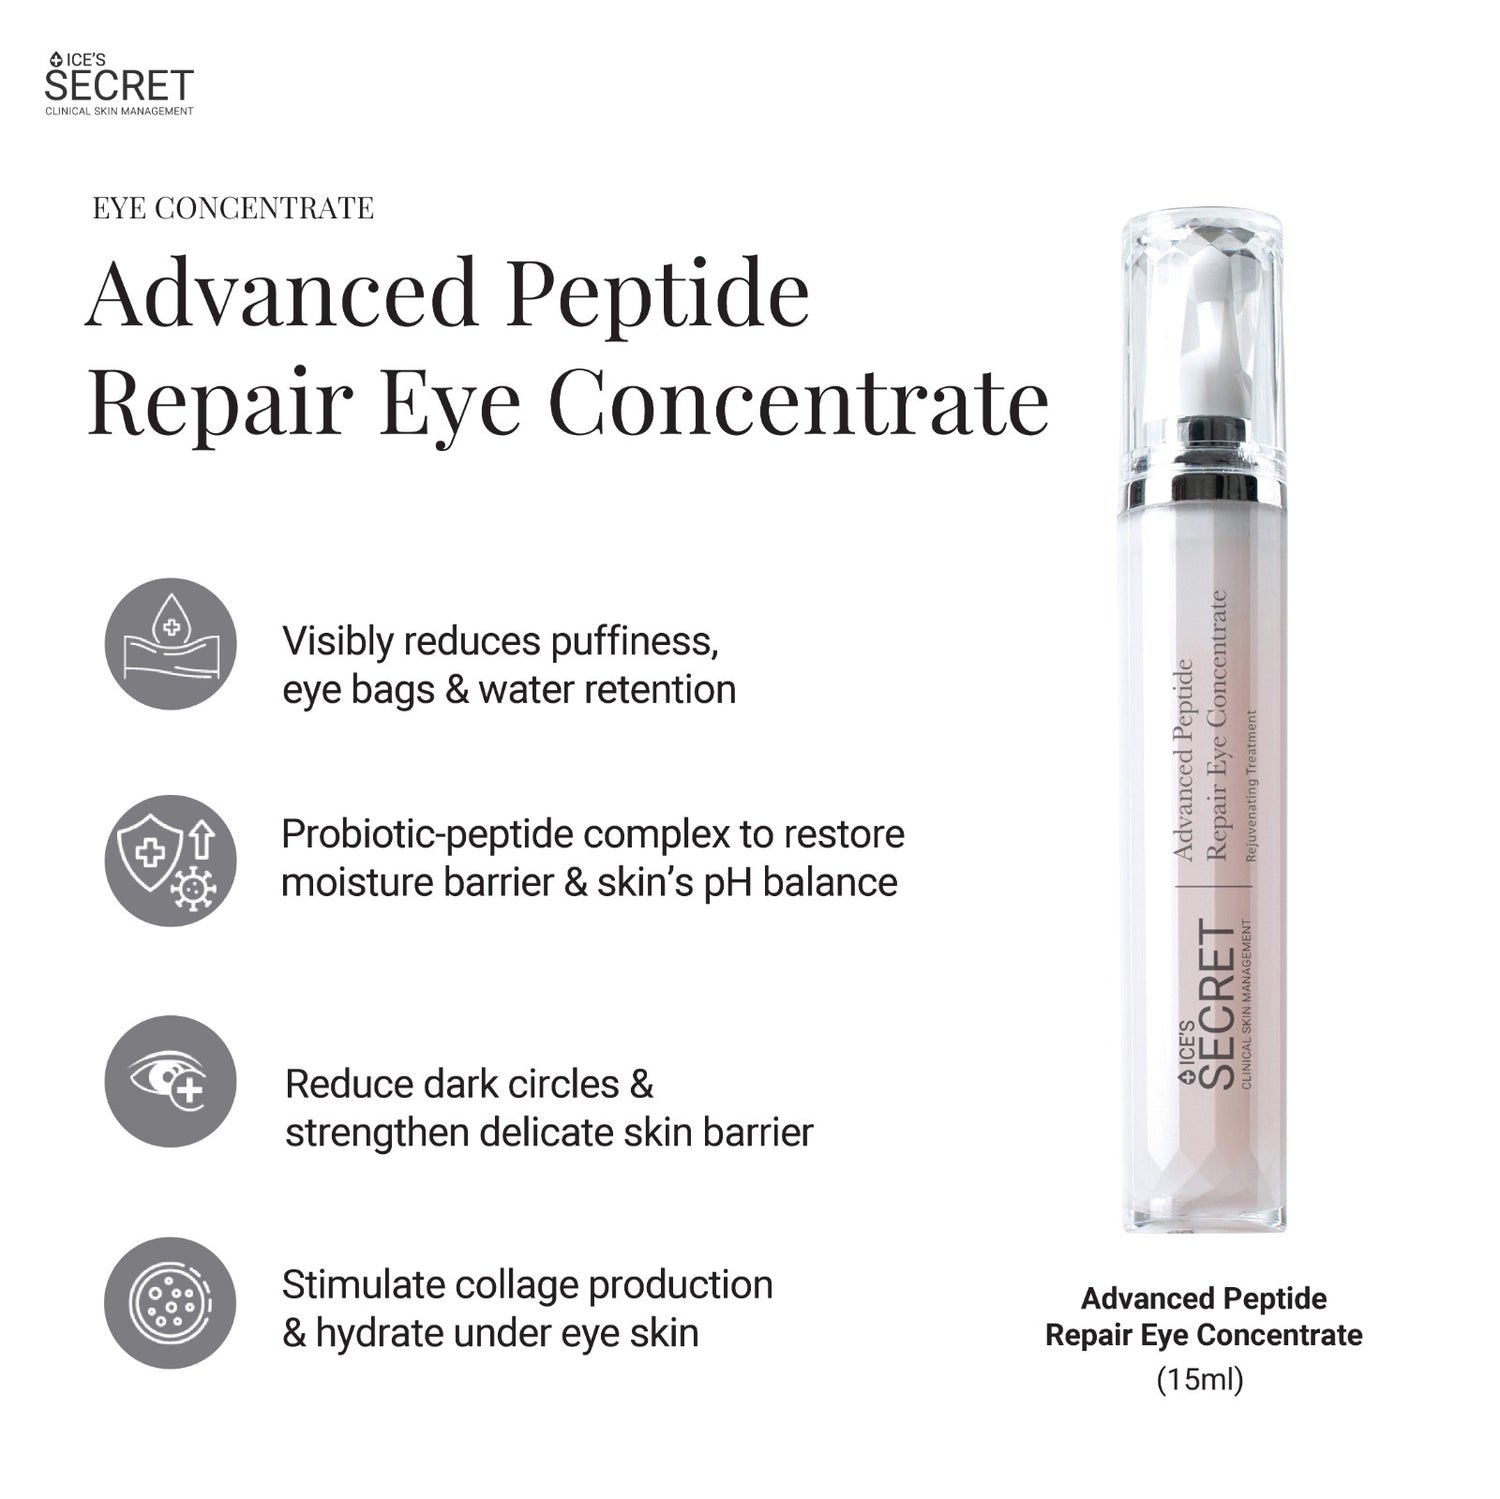 Advanced Peptide Repair Eye Concentrate